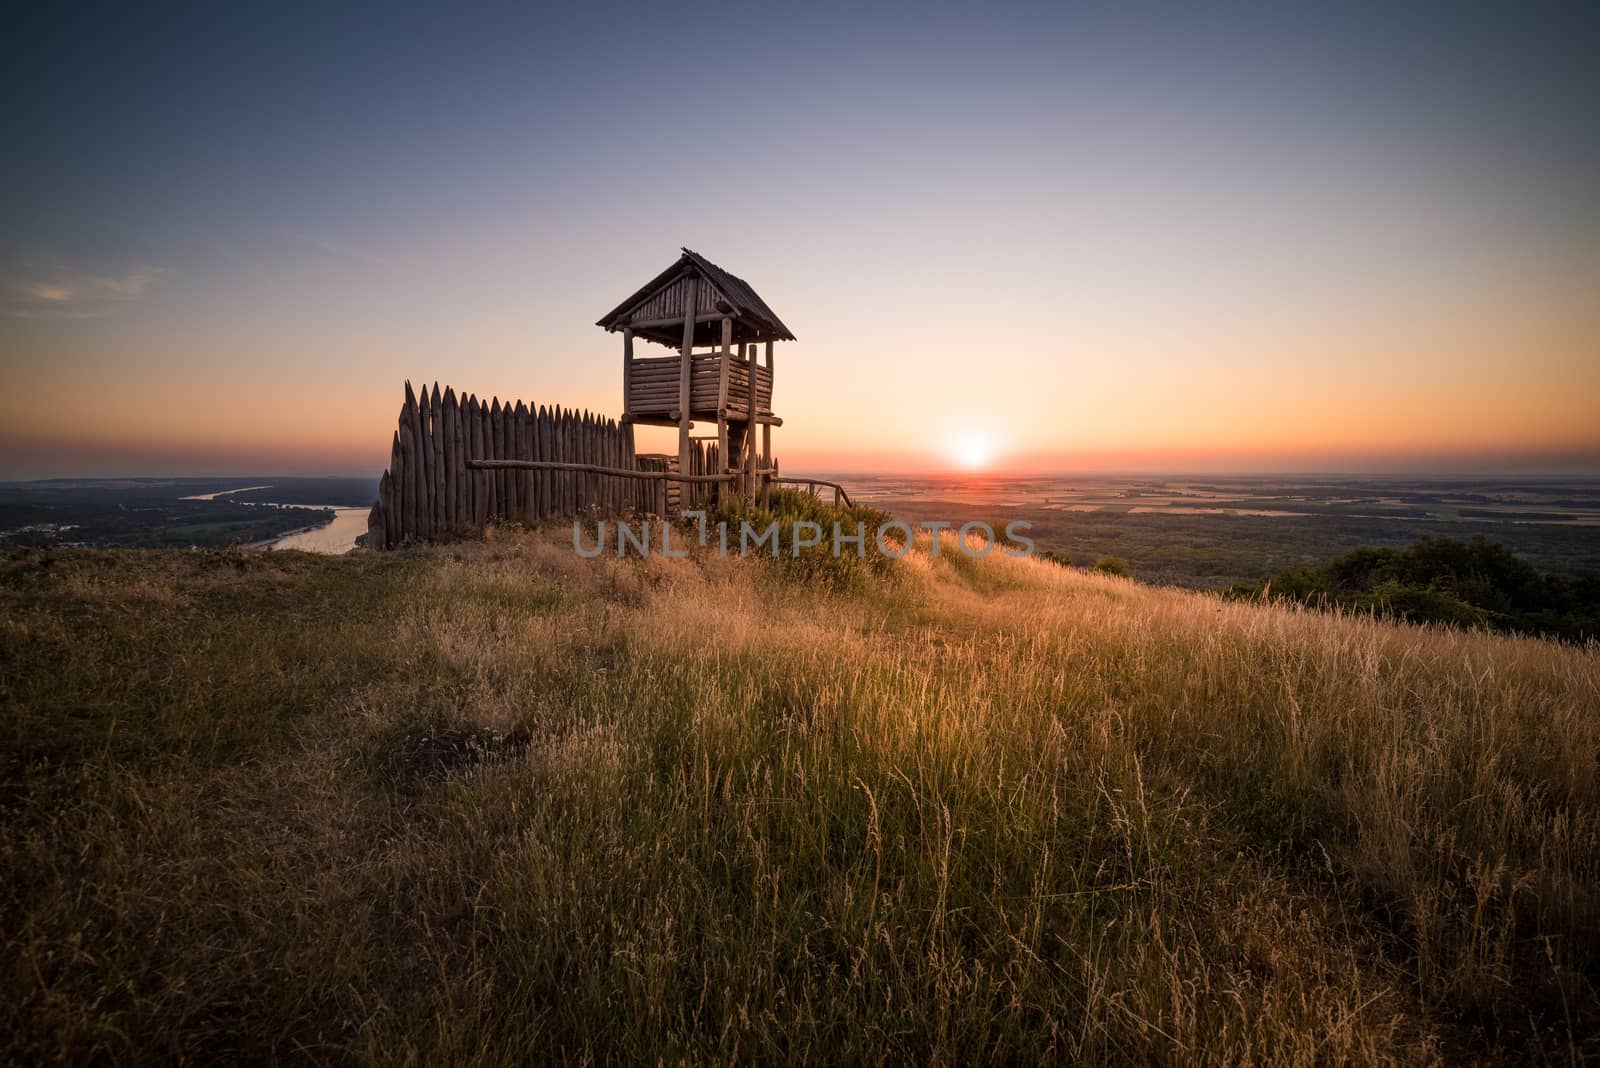 Wooden Tourist Observation Tower over a Landscape at Beautiful Sunset